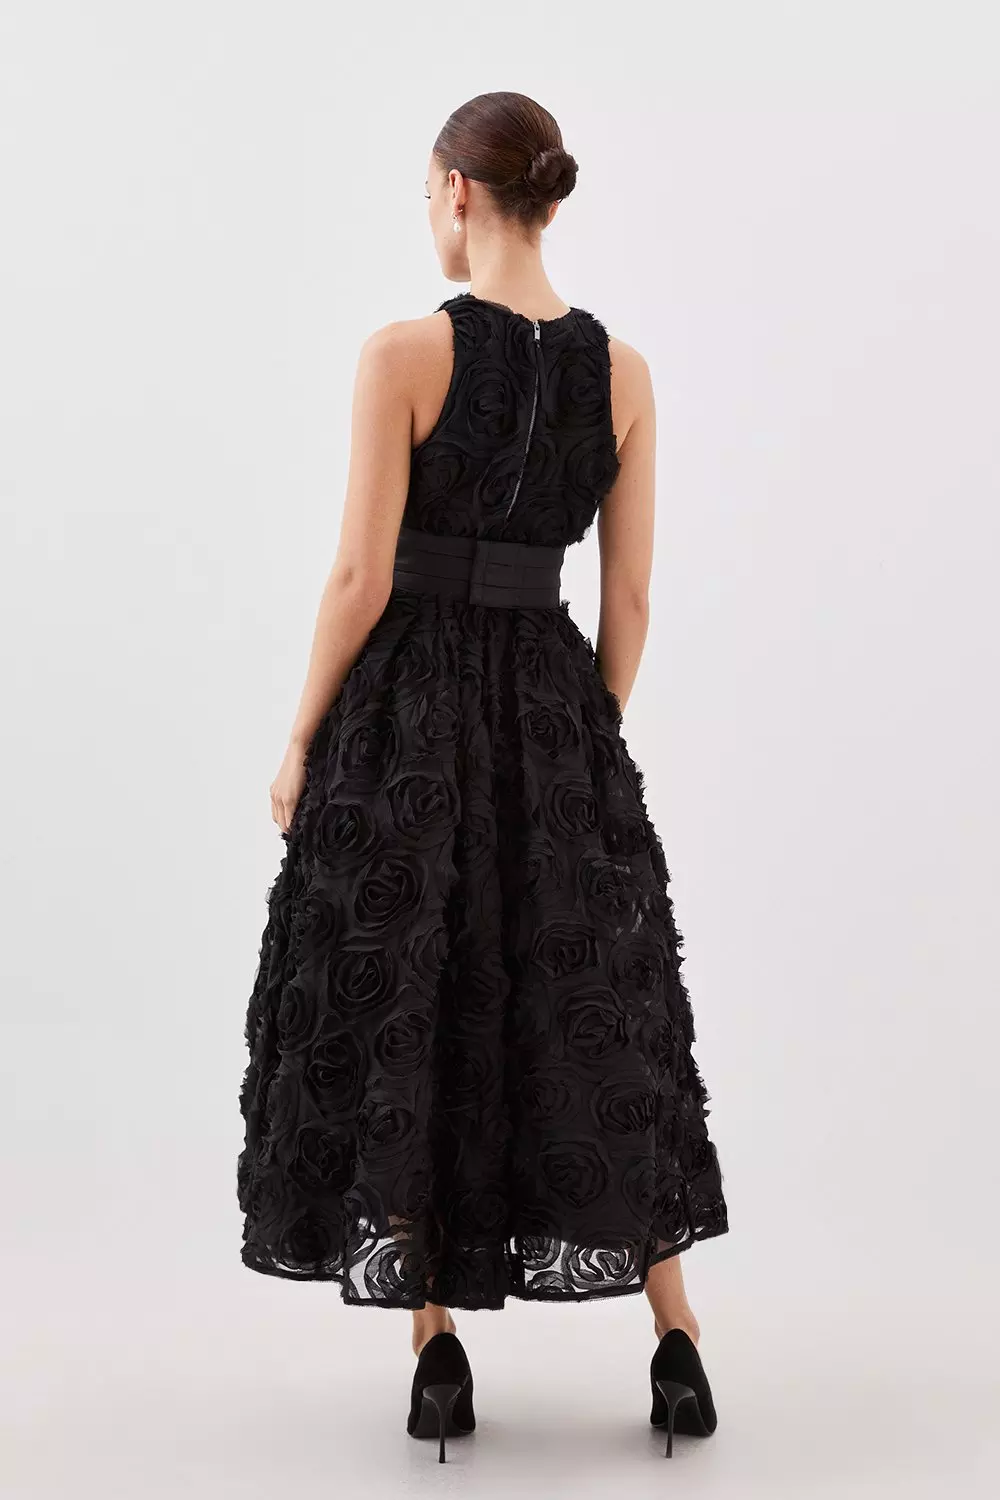 Buy RARE Black Lace Belted Tiered Midi Dress - Dresses for Women 6638104